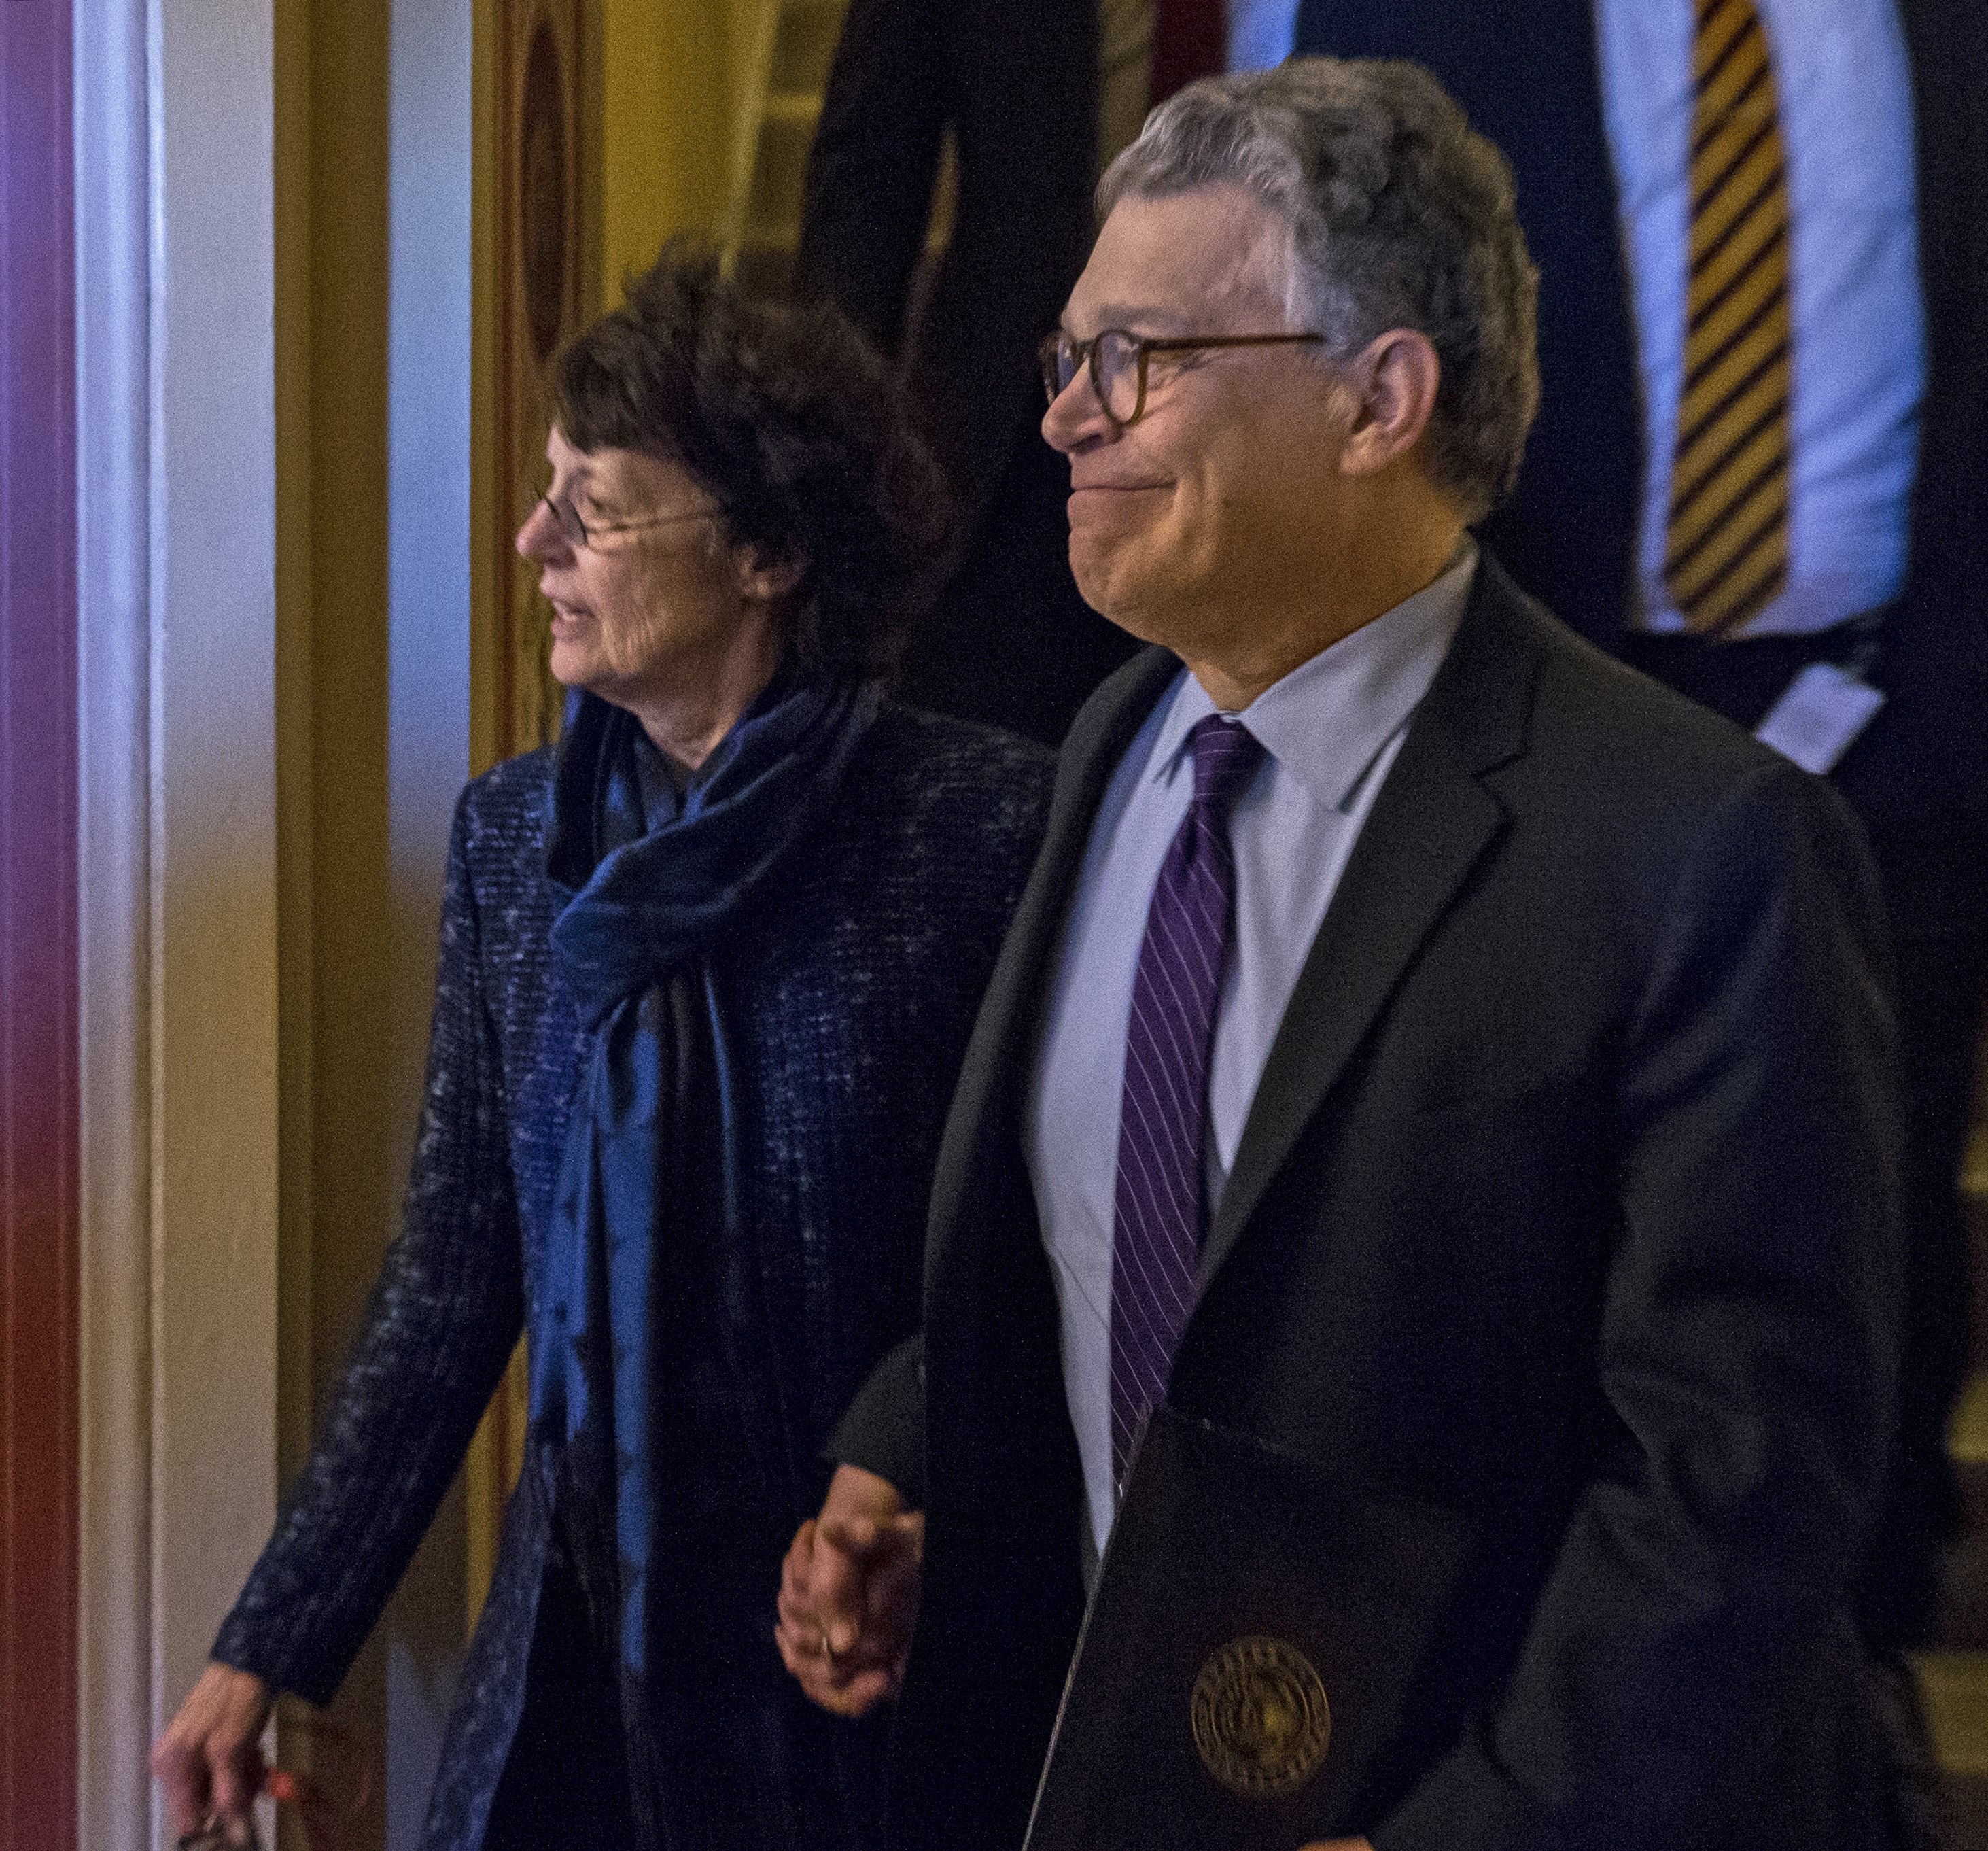 US Democratic Senator from Minnesota Al Franken (R) with his wife Frannni Bryson (L) walk to his car after his resignation speech on the Senate floor in the US Capitol in Washington DC, USA, Dec. 7, 2017.
